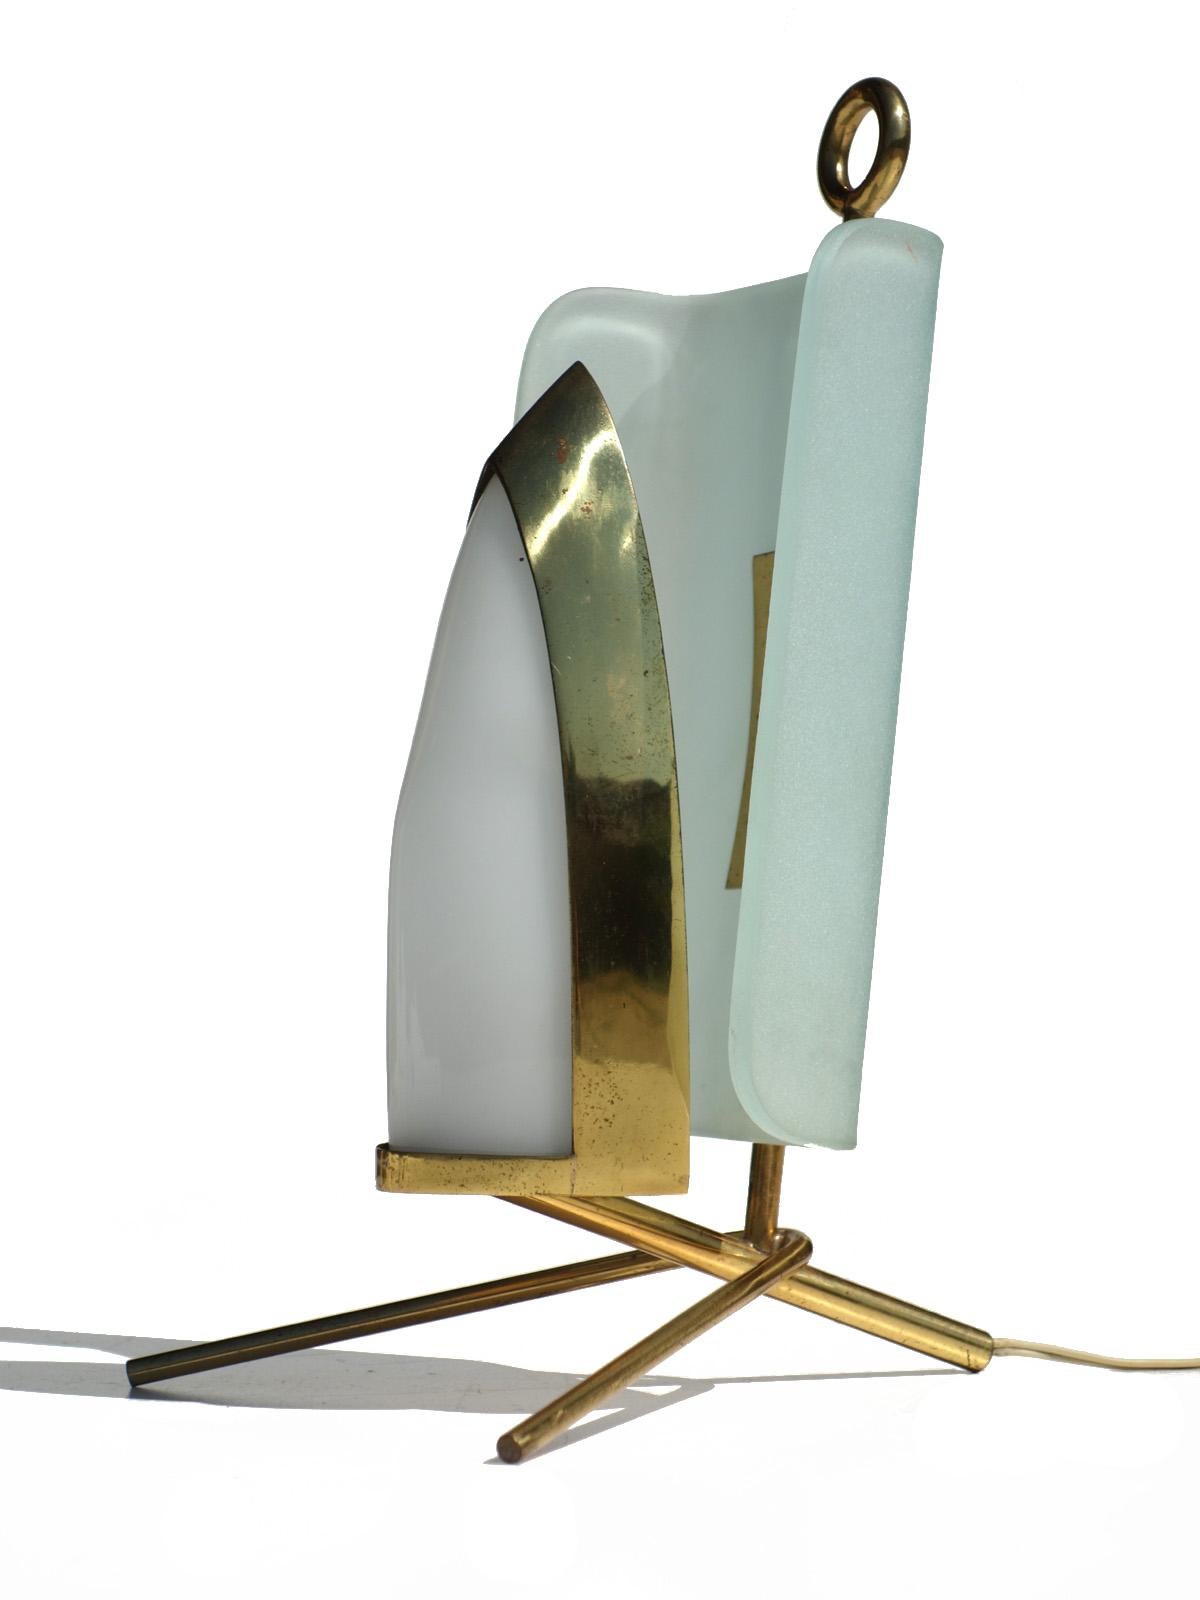 Table Lamp by Arredoluce
Italy, 1950.

Brass frame, curved glass and white plastic.
Excellent condition
Perfect working order.